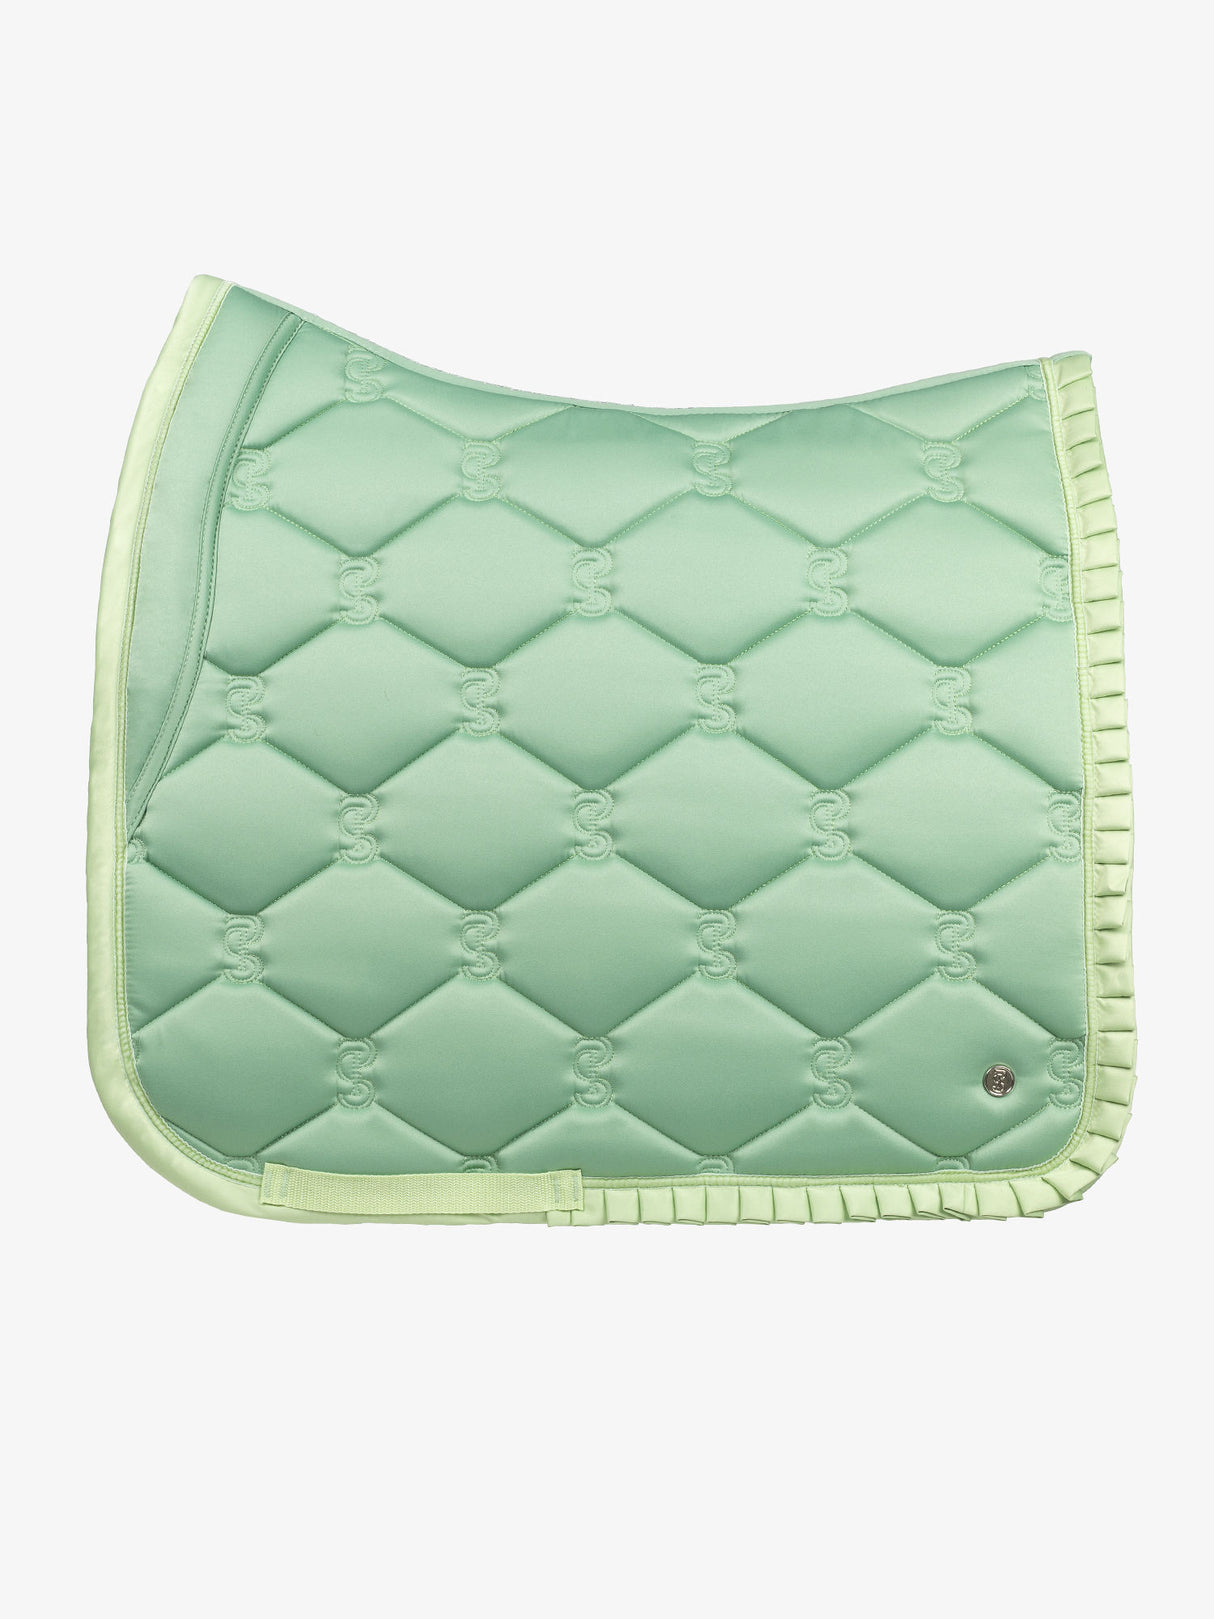 PS of Sweden Ruffle Dressage Saddle Pad Sage Green